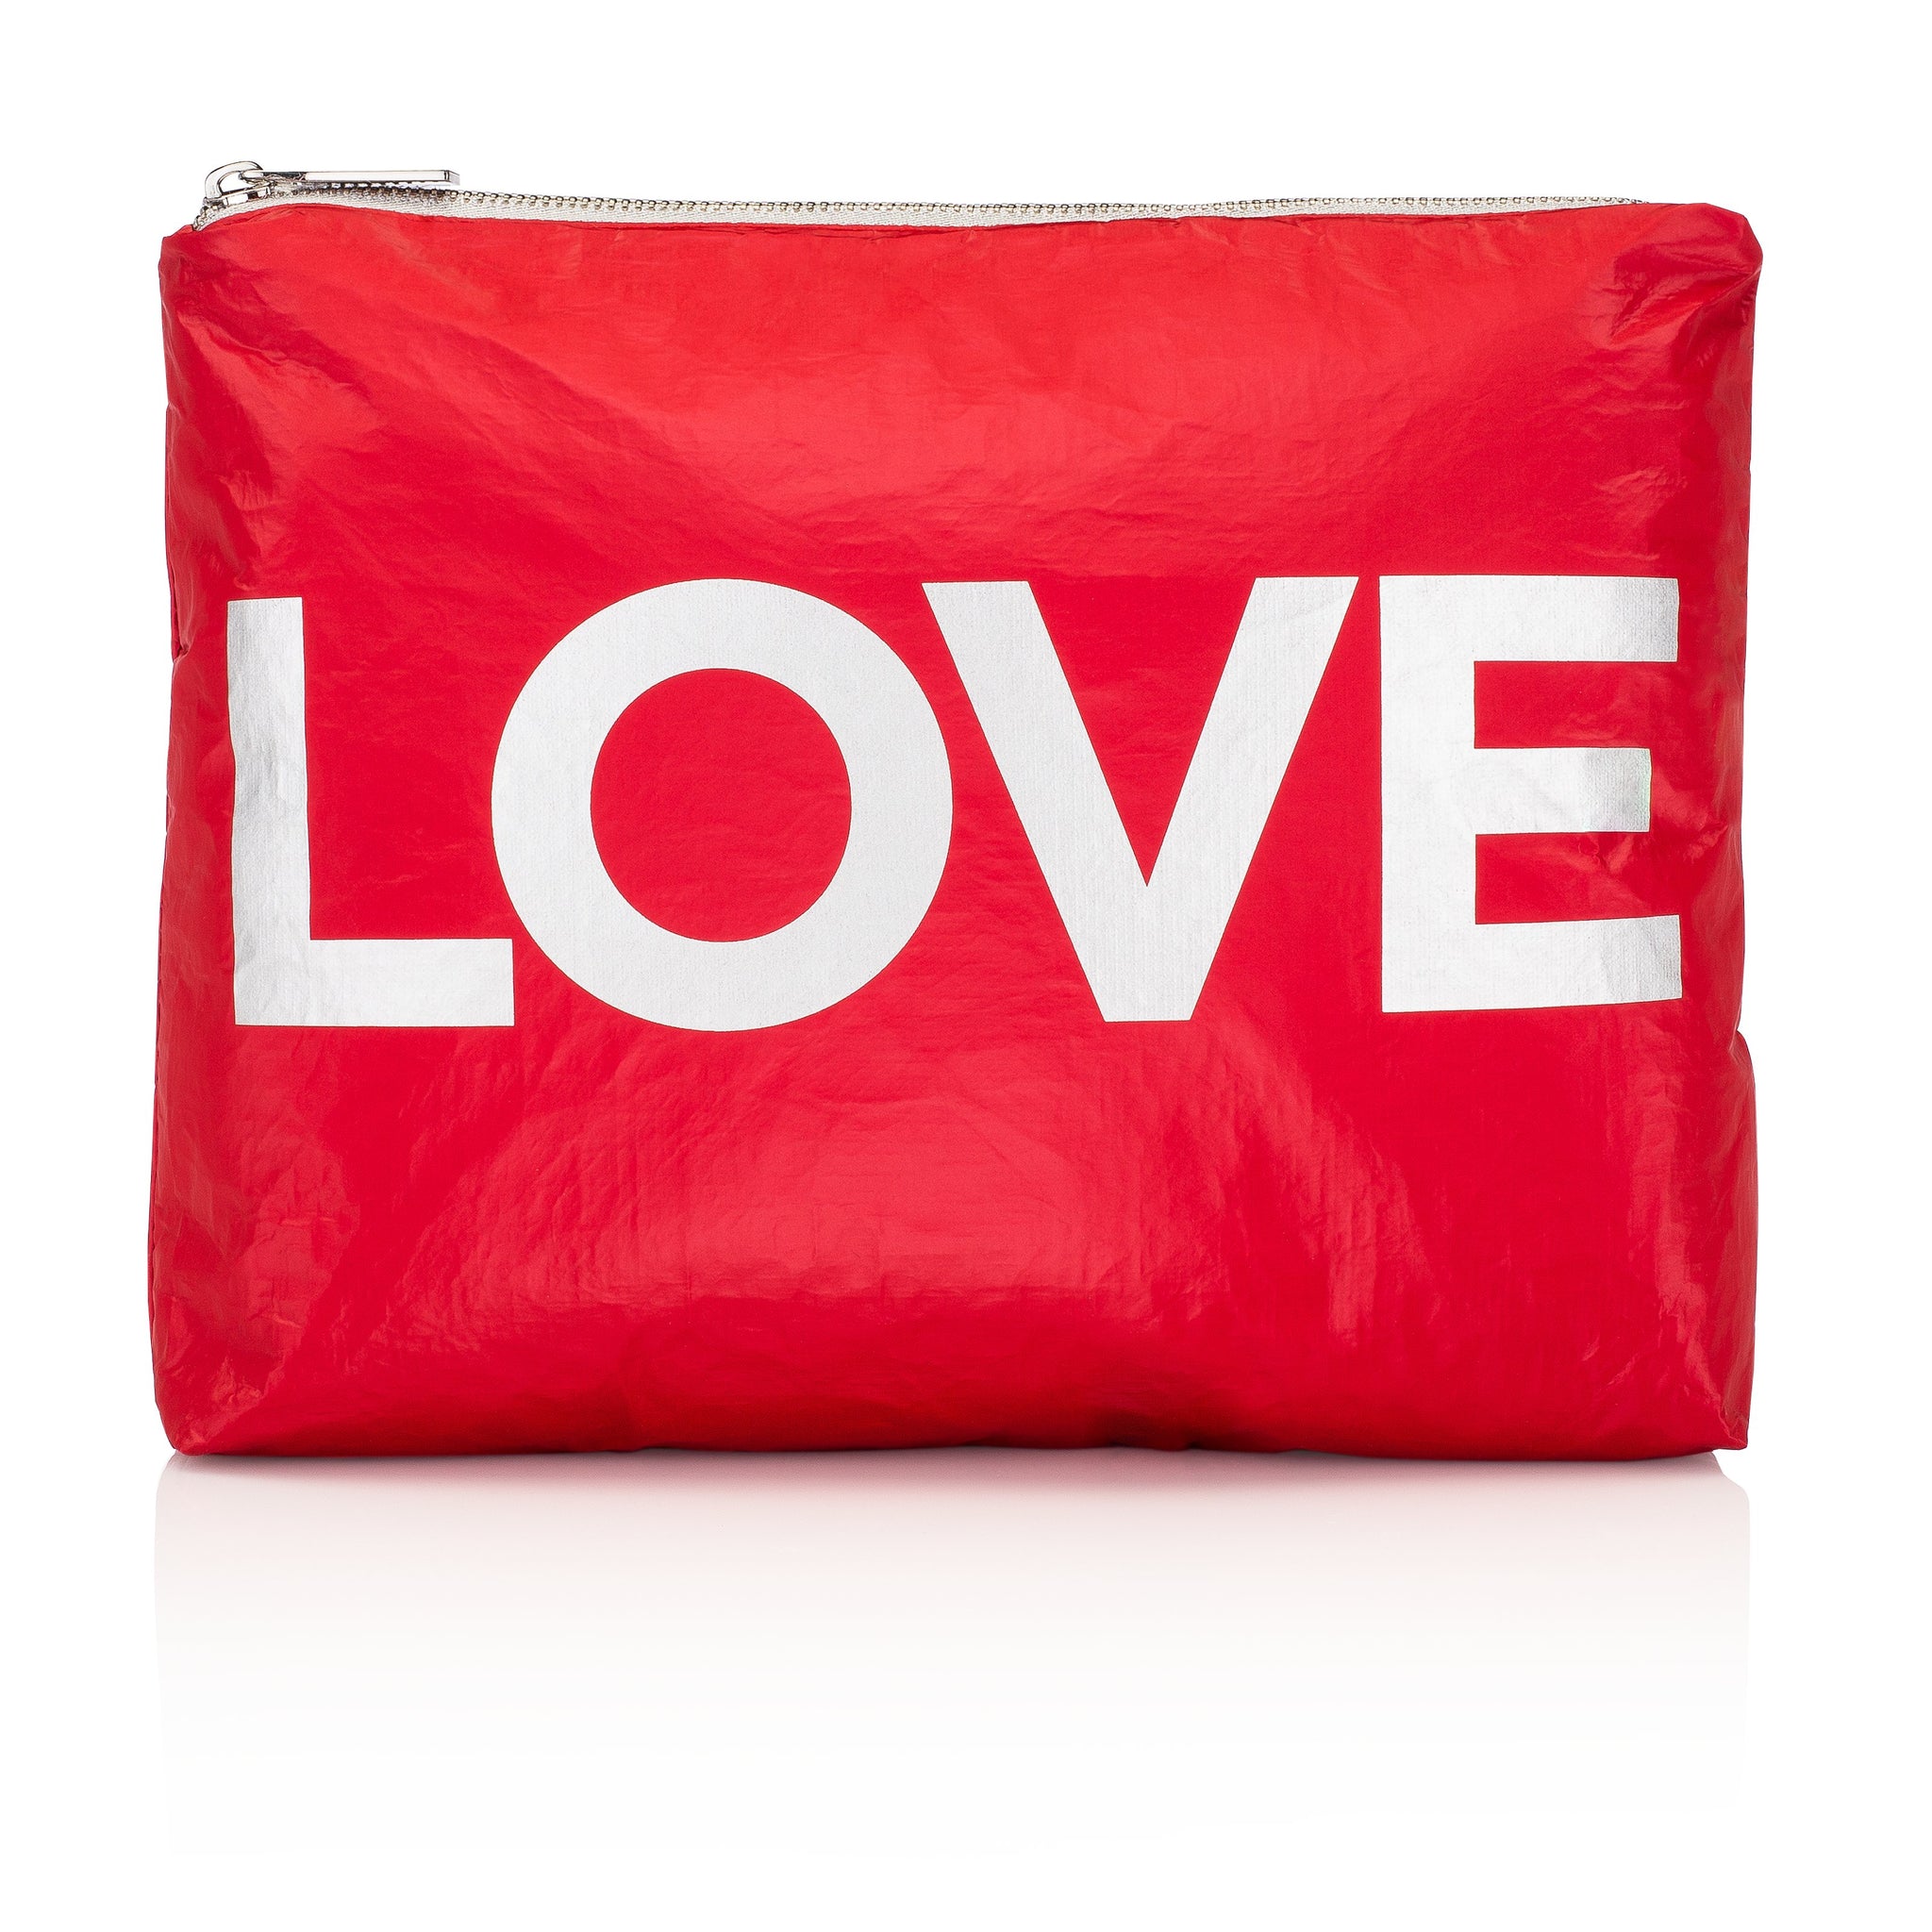 Travel Pack - Makeup Pouch - Medium Pack - Chili Pepper Red with Metallic Silver "LOVE"